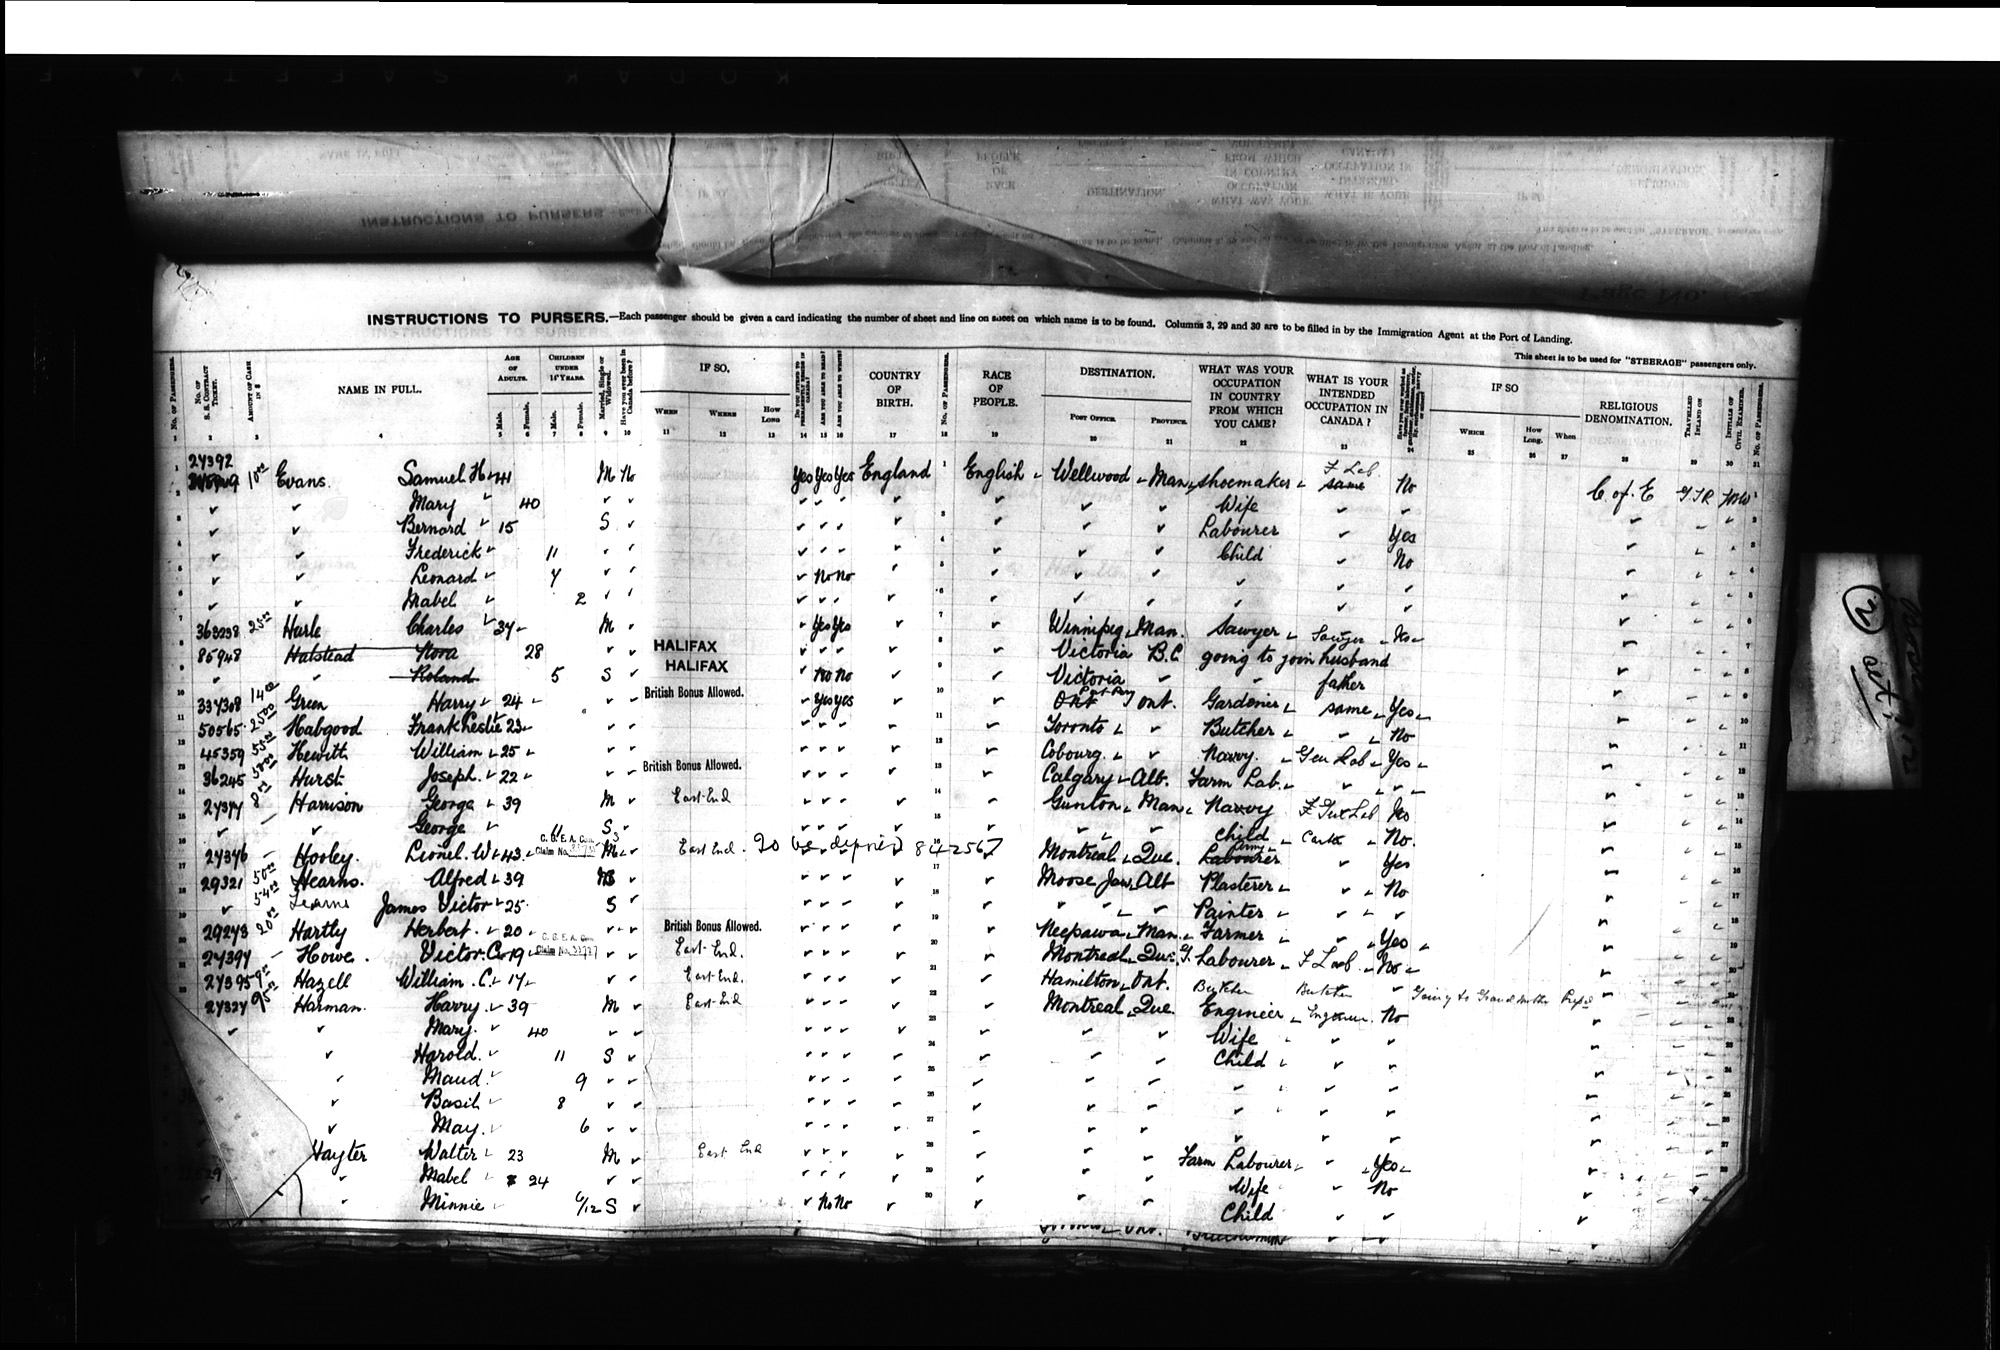 Digitized page of Passenger Lists for Image No.: CANIMM1913PLIST_0000406960-00227